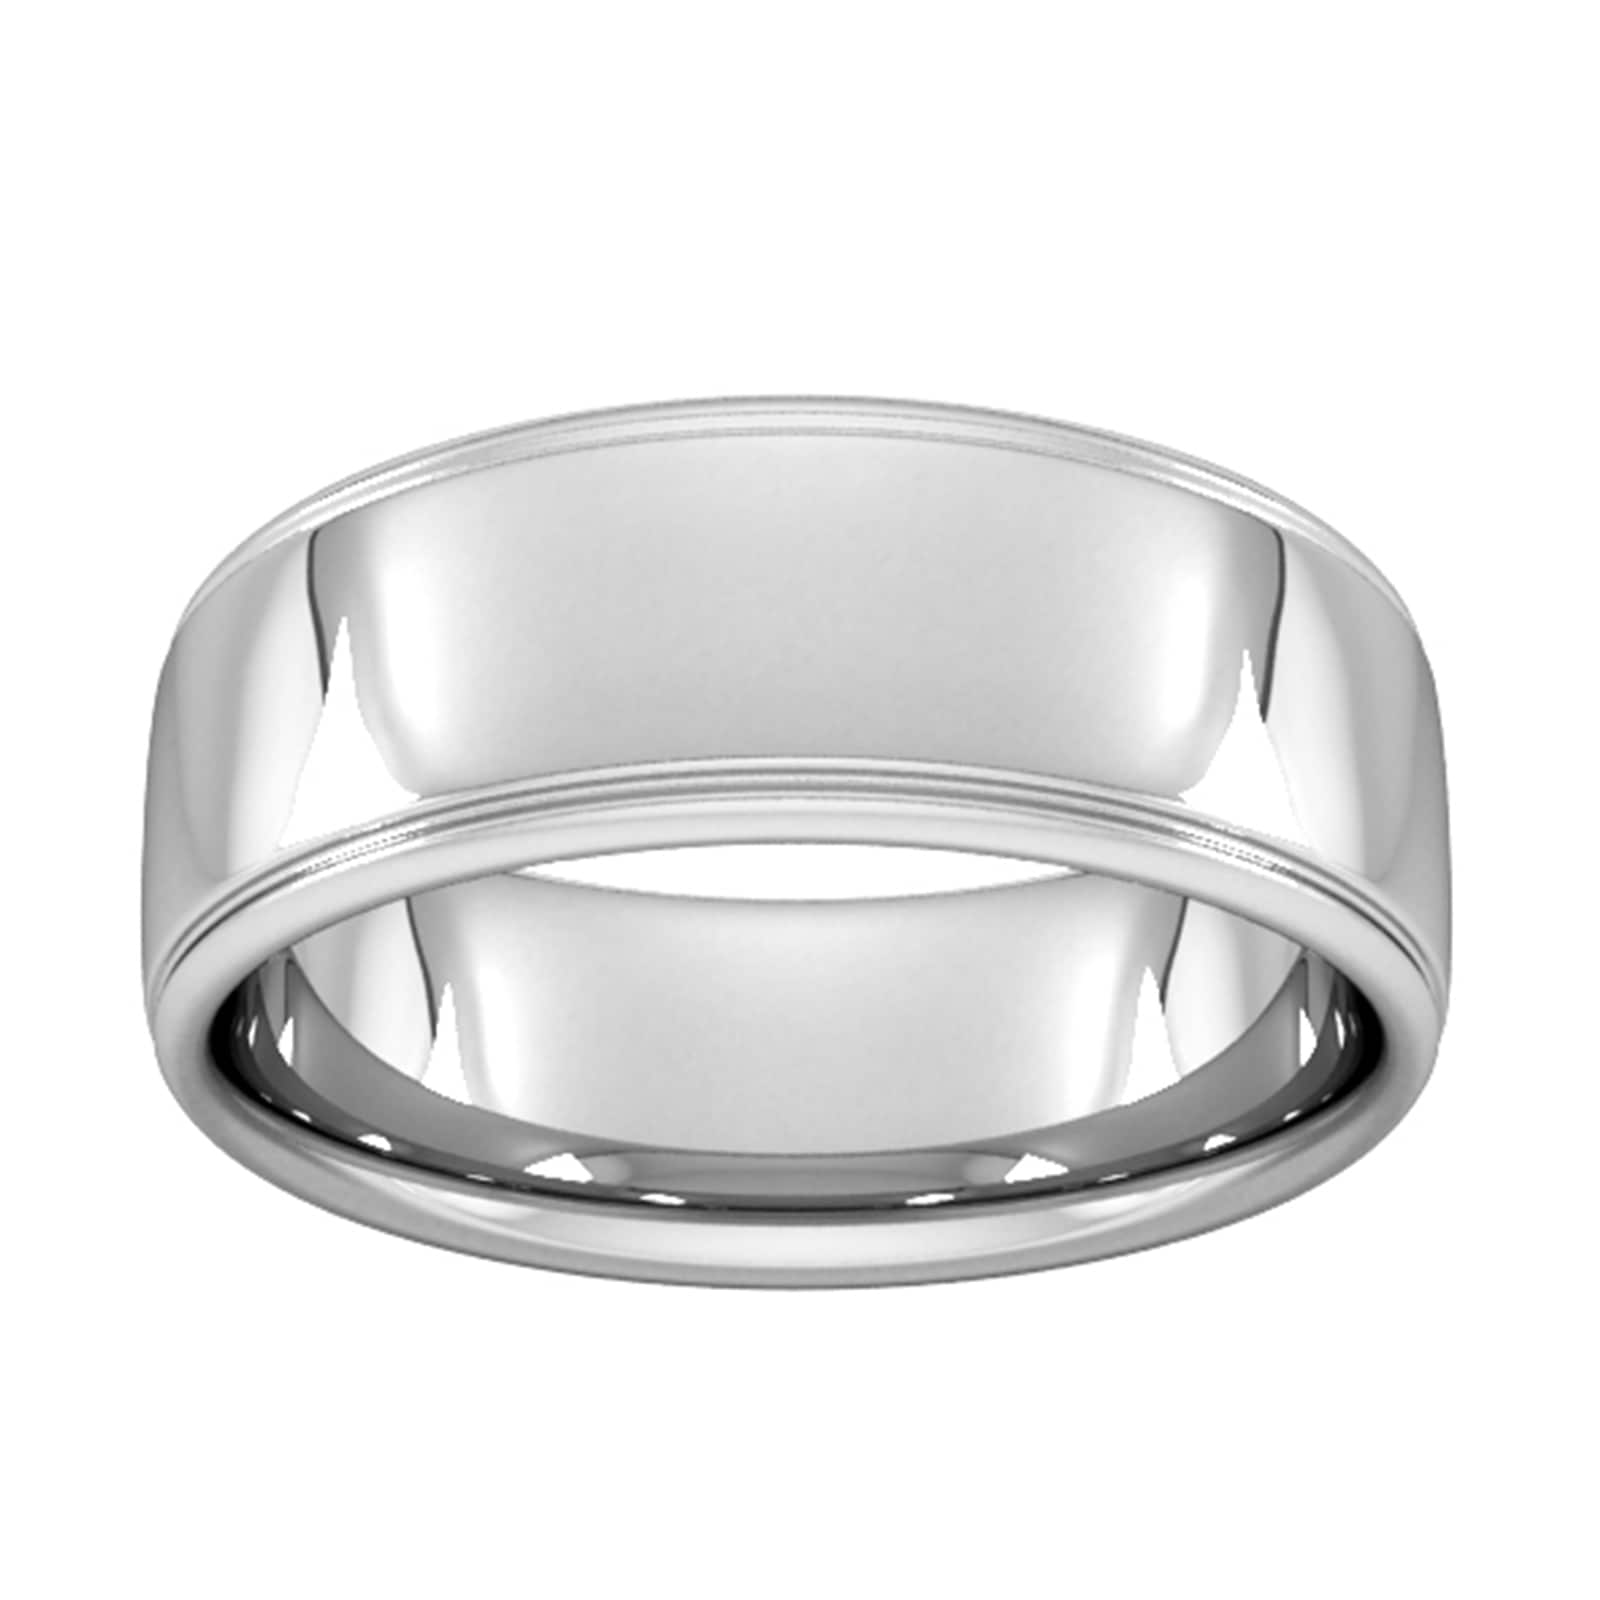 8mm Slight Court Extra Heavy Polished Finish With Grooves Wedding Ring In 9 Carat White Gold - Ring Size J